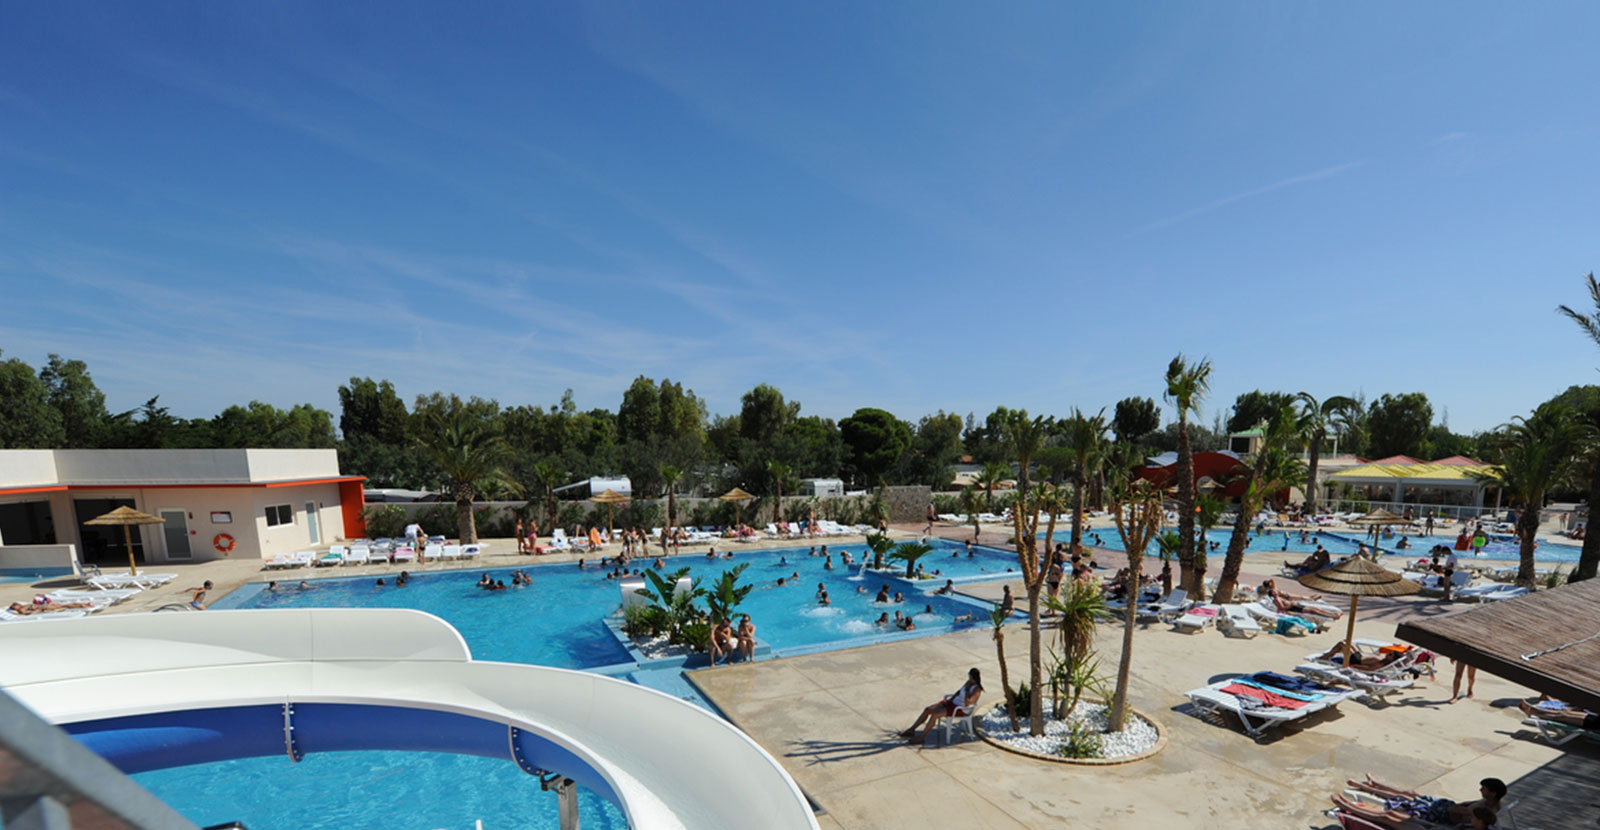 your campsite and pool complex is ready and waiting in Le Barcarès ...